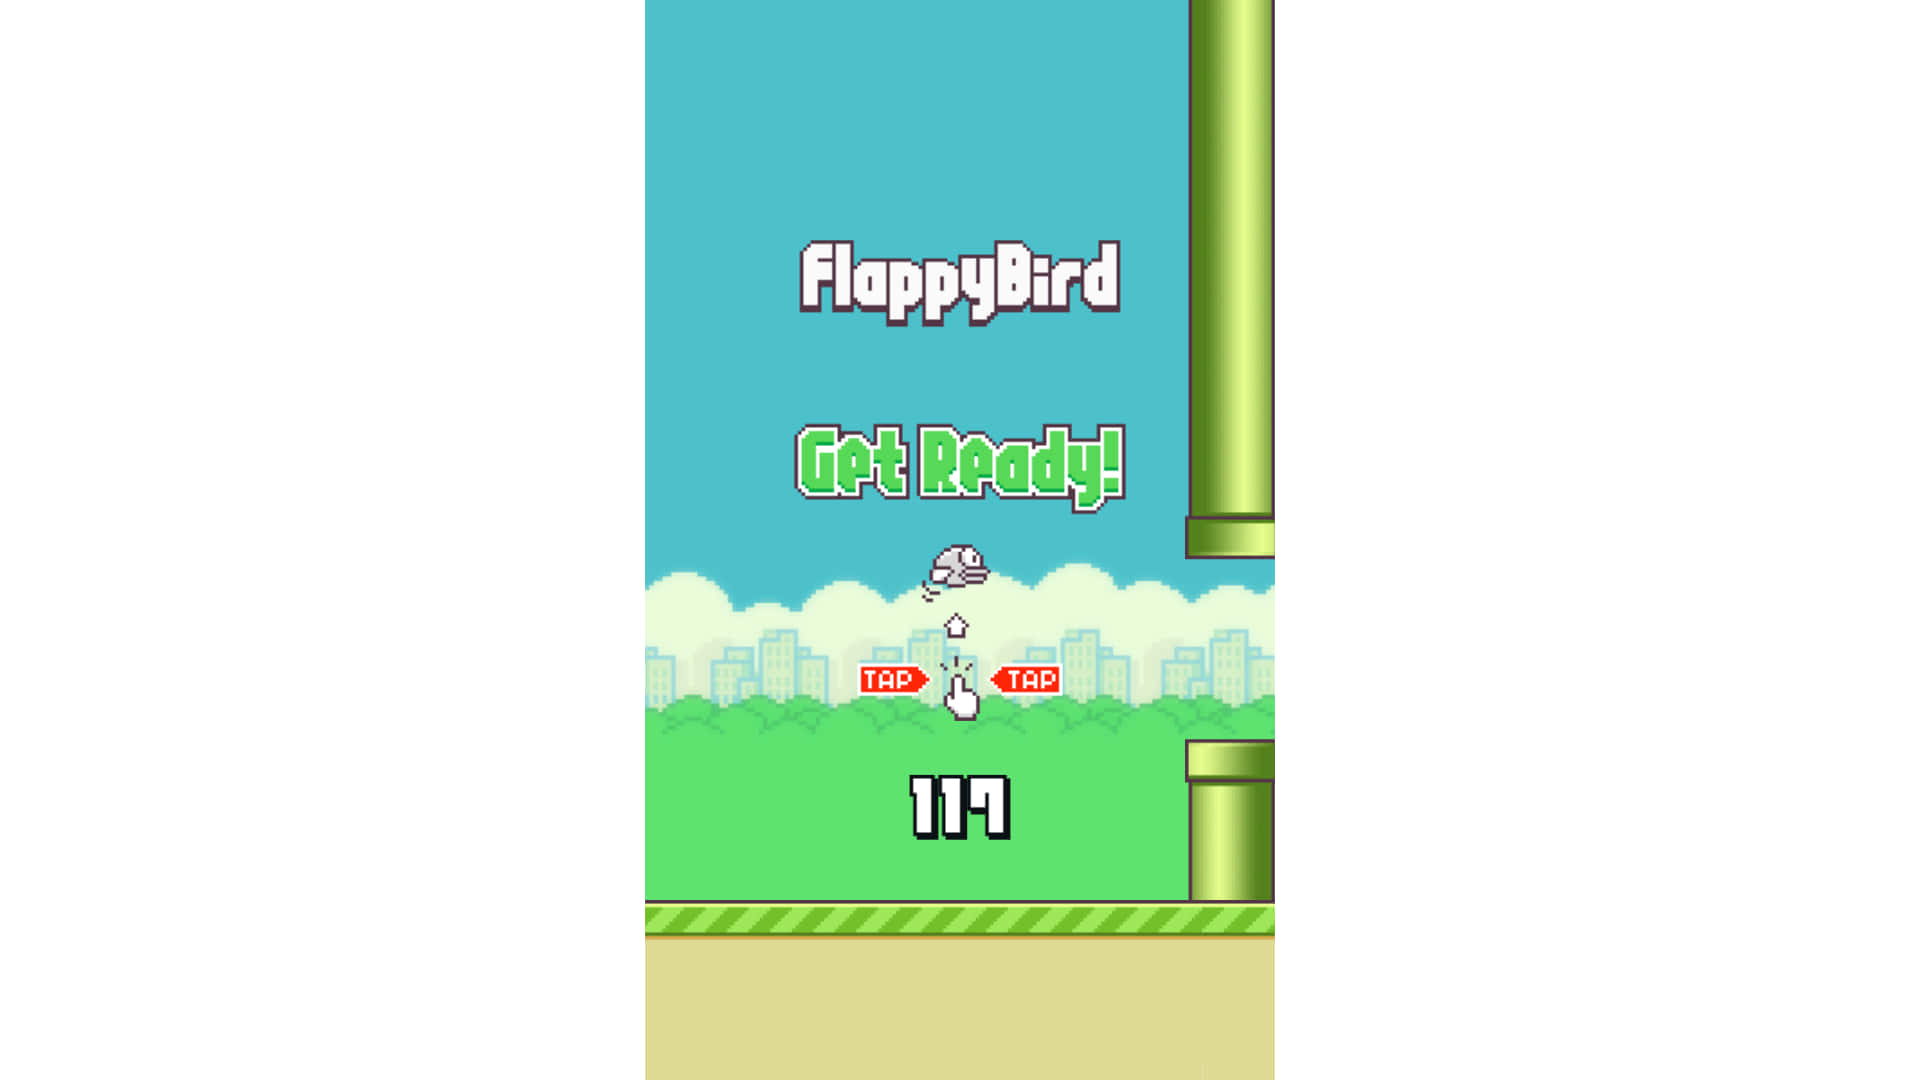 Enjoy the adrenaline and challenge of Flappy Bird